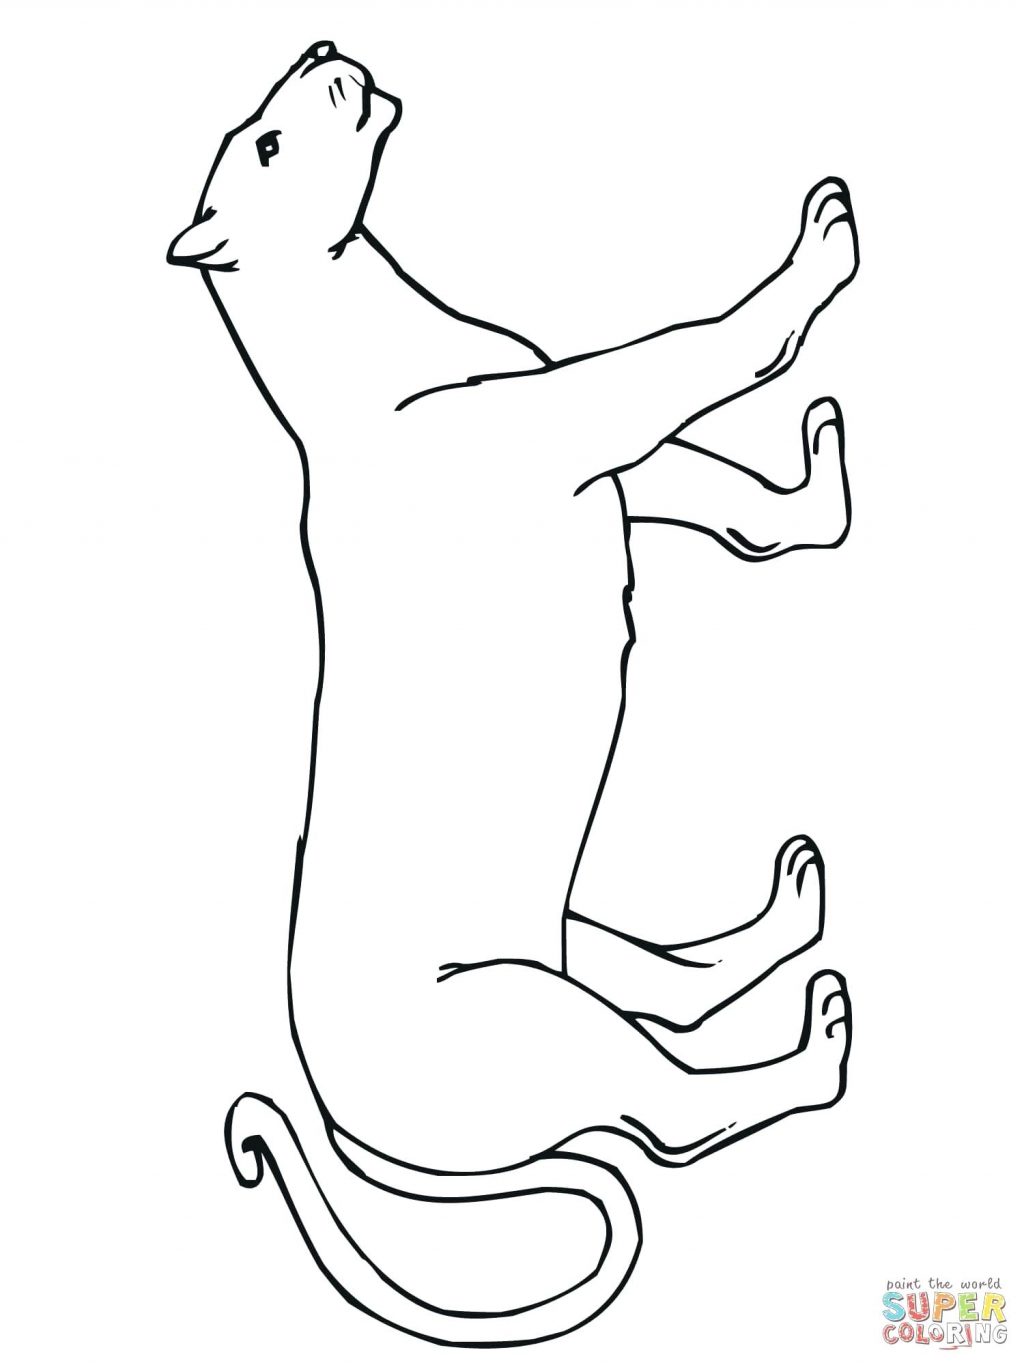 Florida Panther Coloring Page at GetColorings.com | Free printable